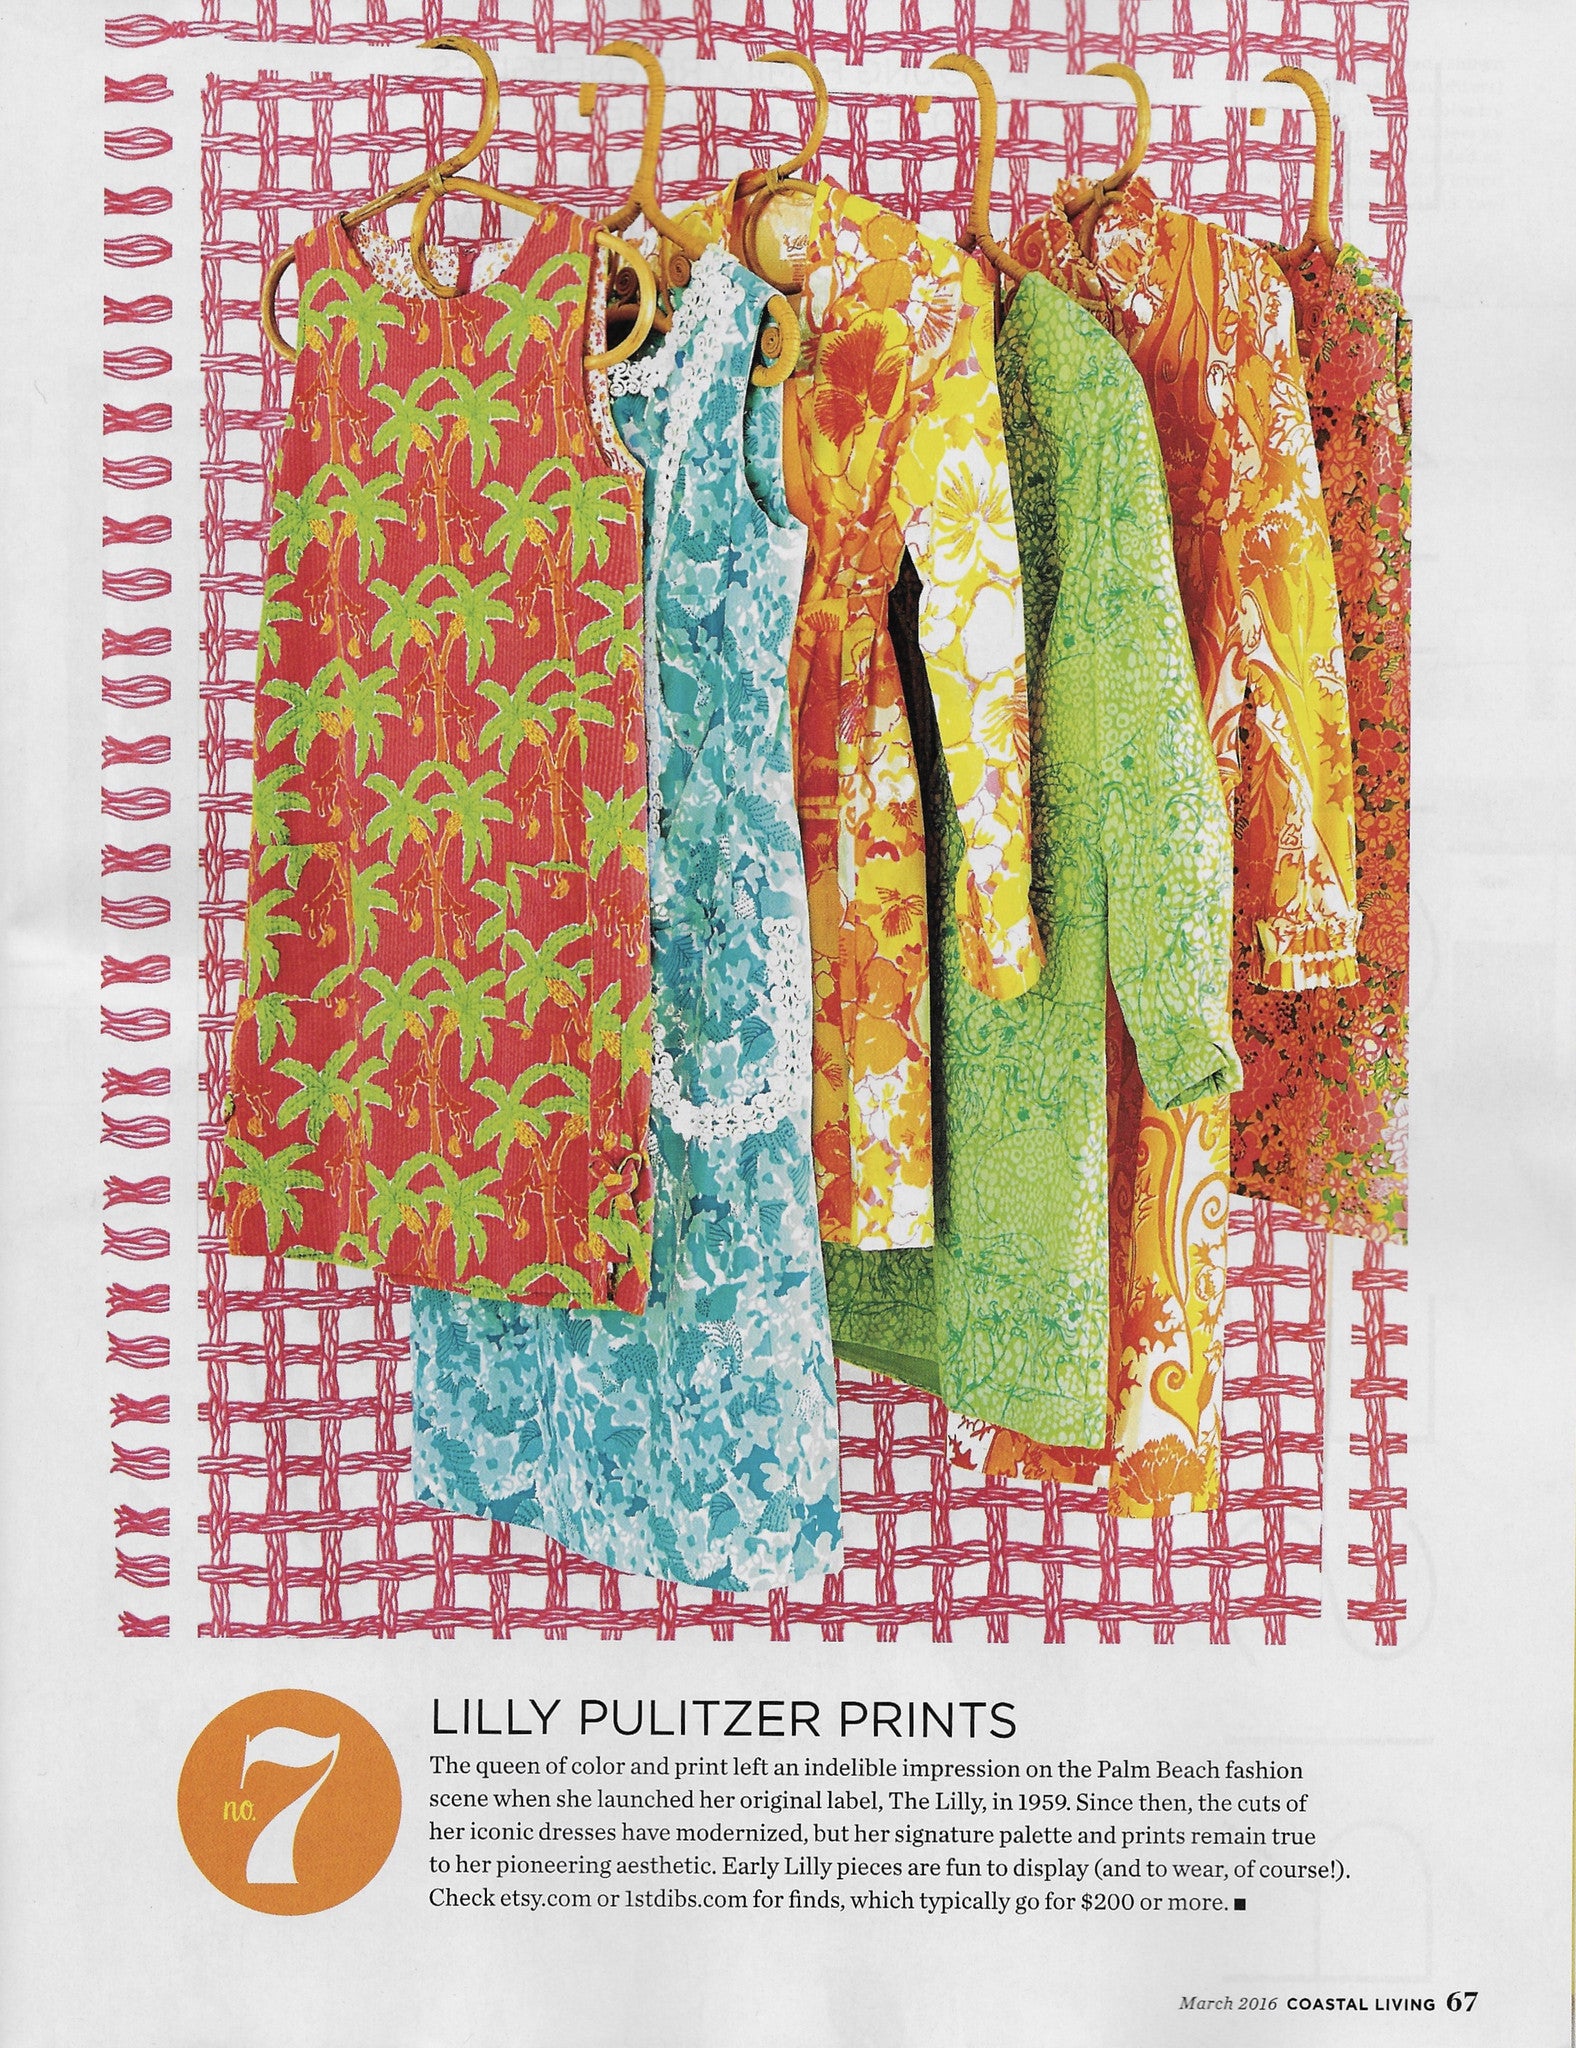 Vintage Lilly Pulitzer in Coastal Living Magazine, March 2016